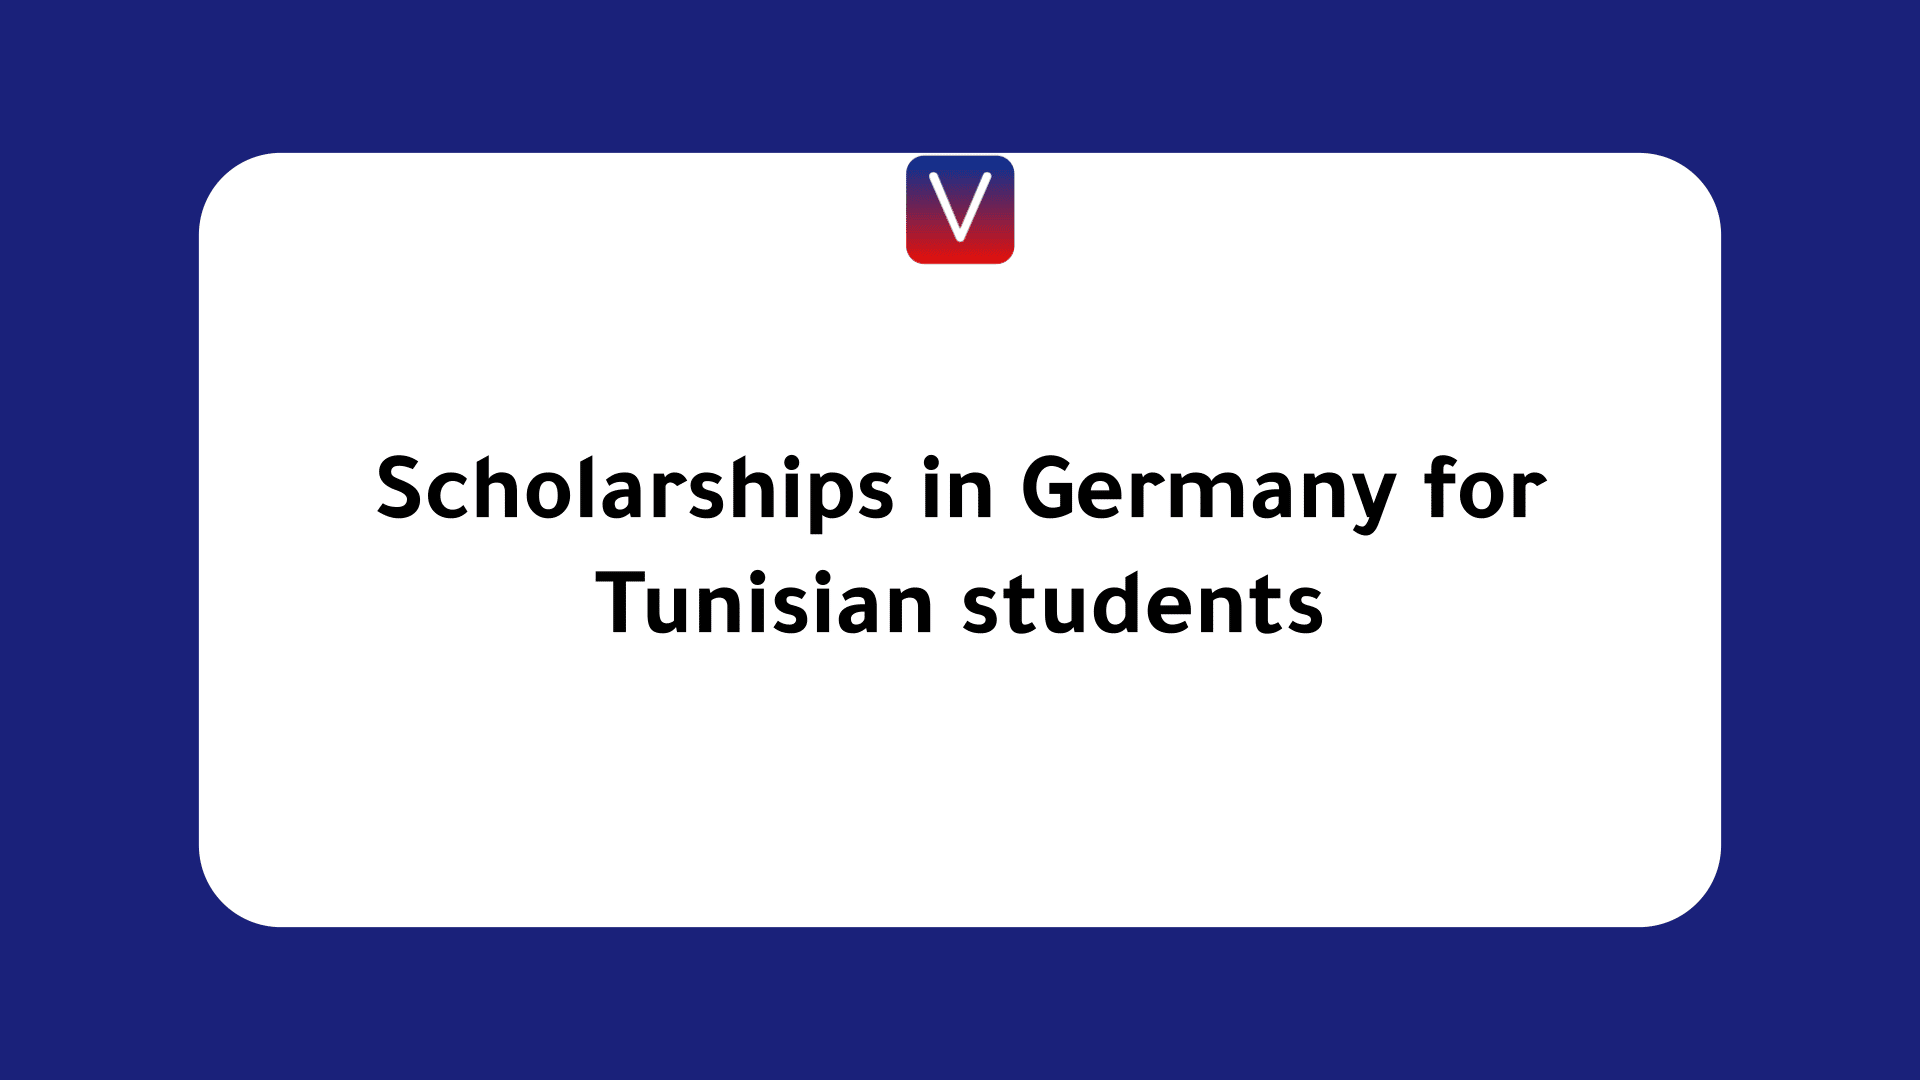 Scholarships in Germany for Tunisian students